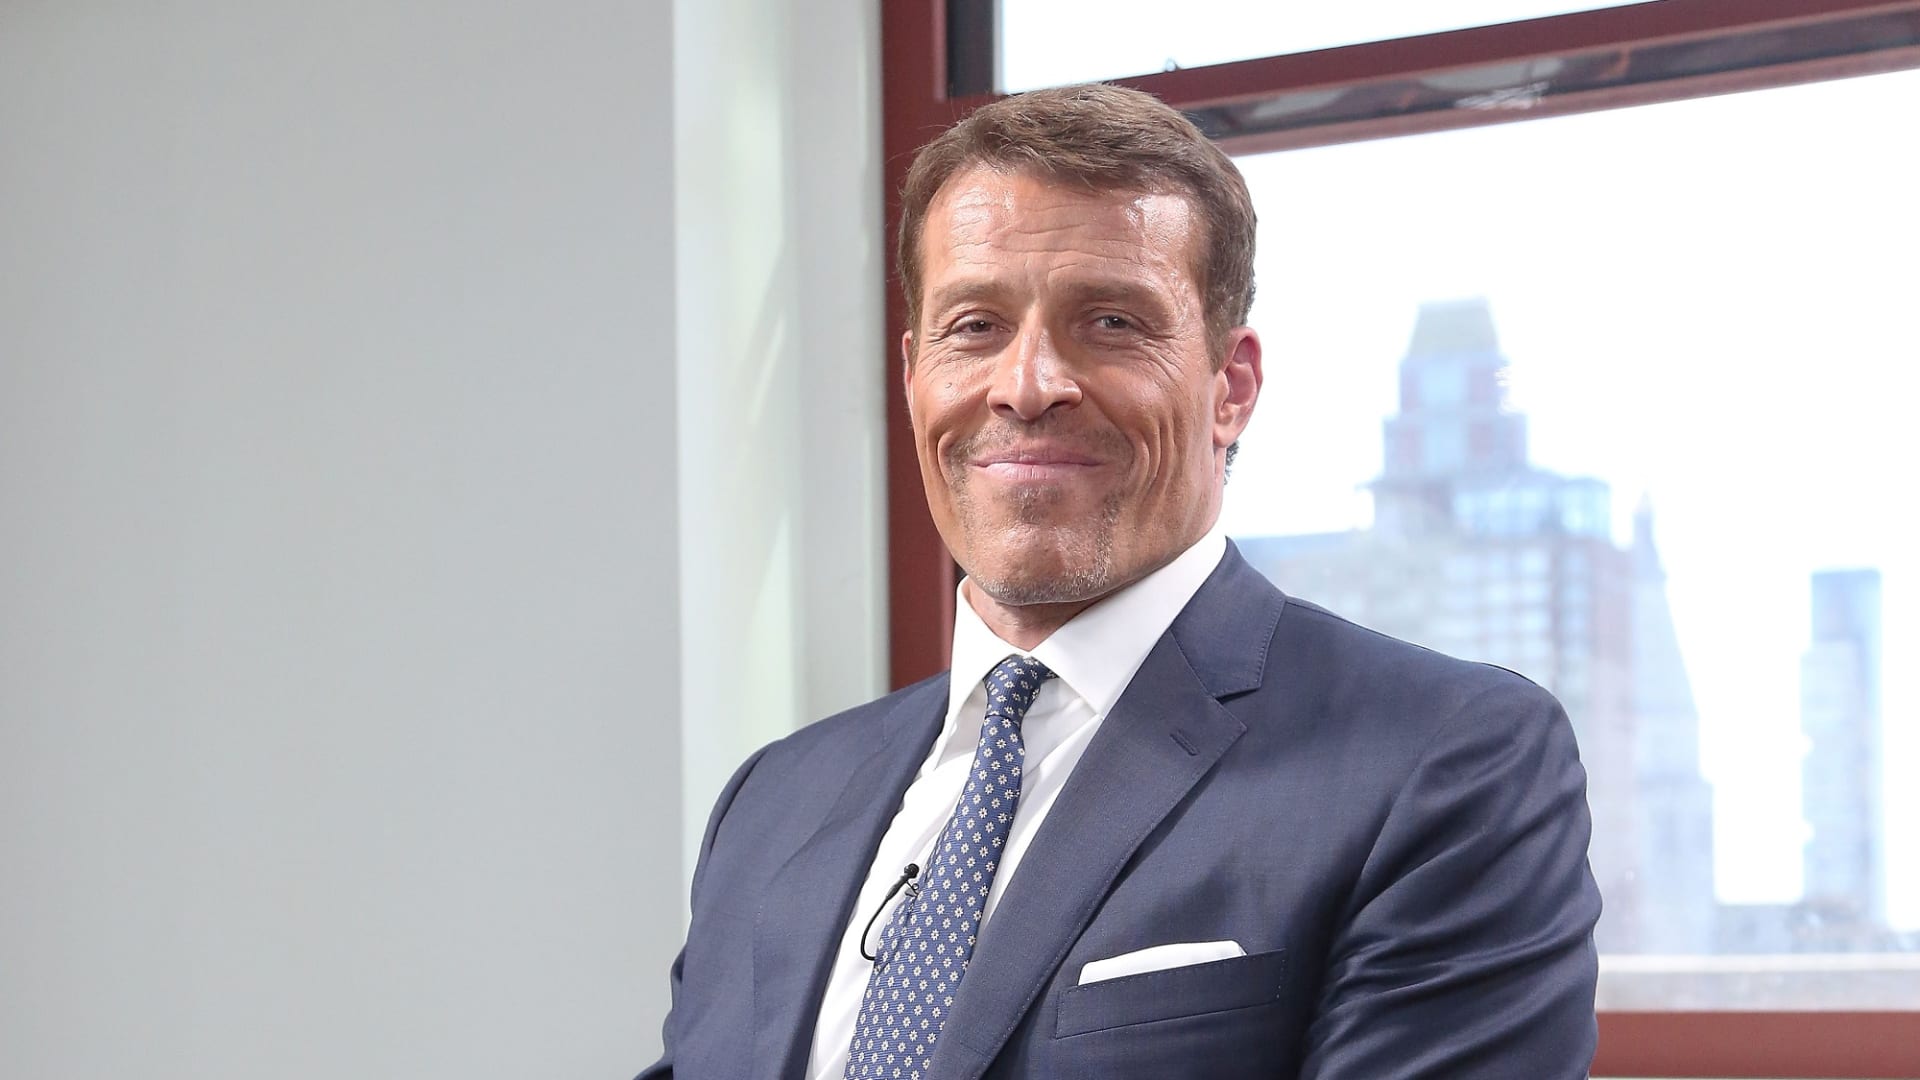 Here's how much money you need to start investing, according to self-made millionaire Tony Robbins